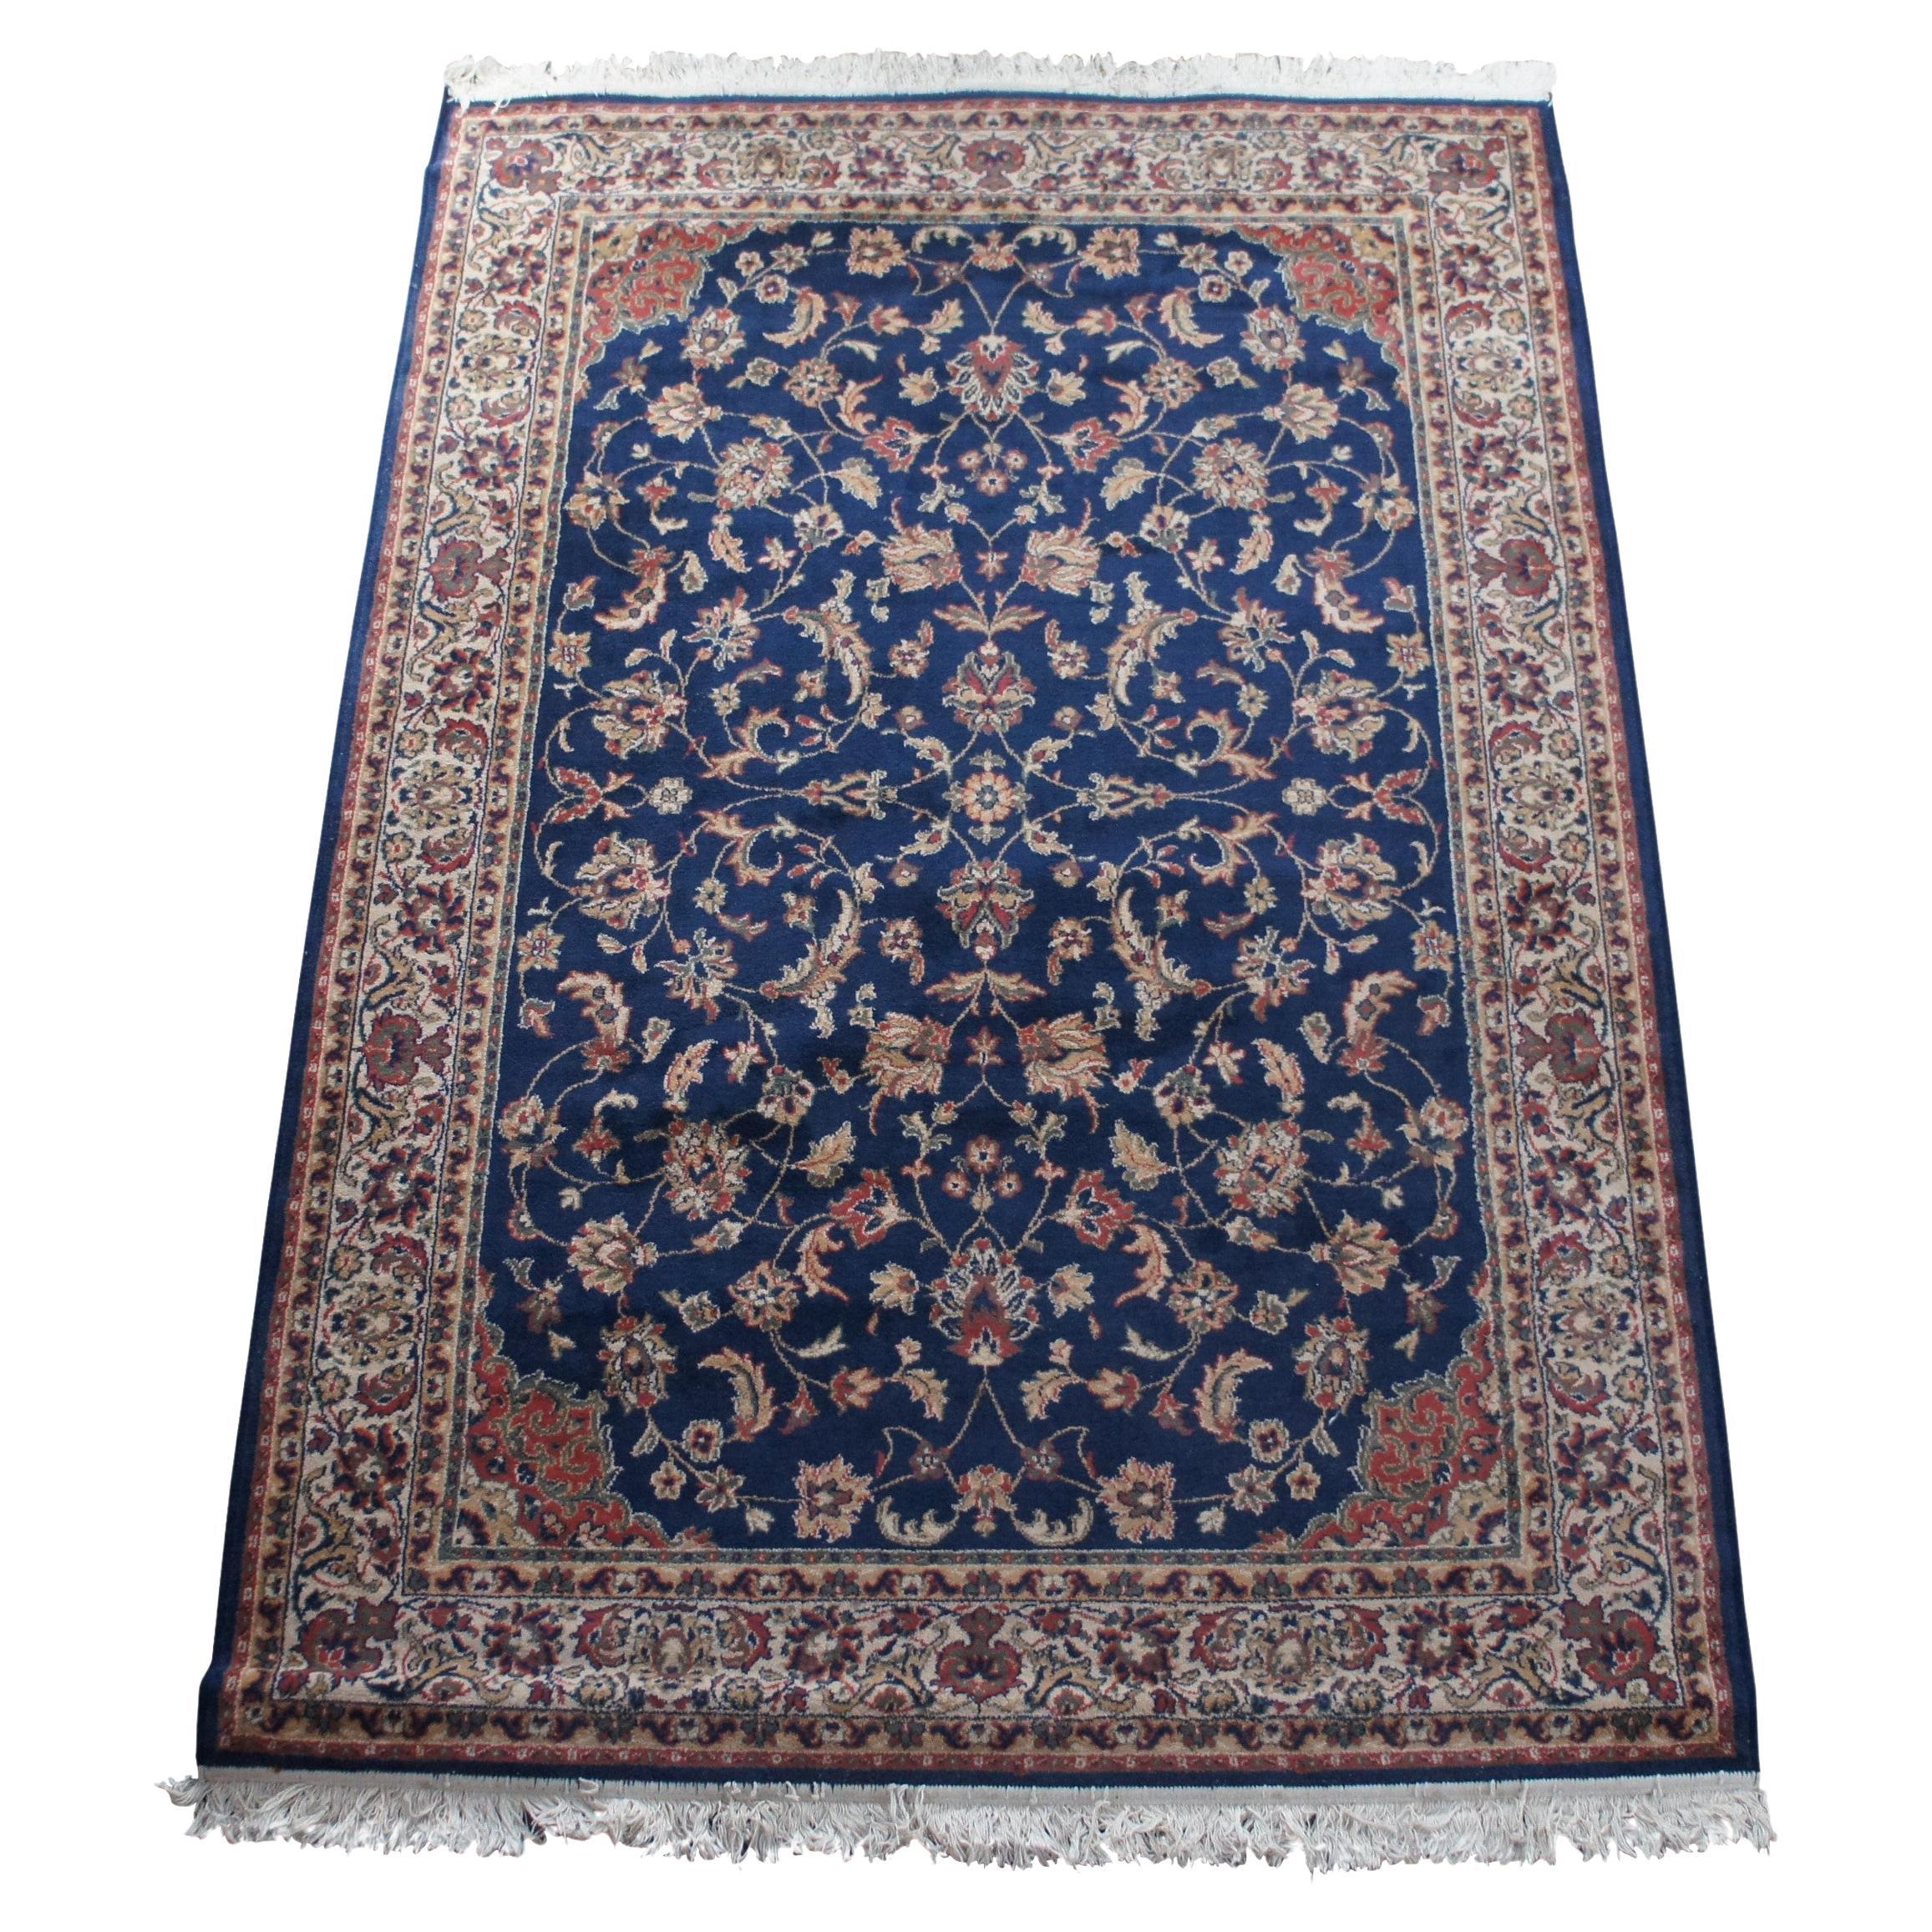 Vintage Royal Persian Sarouk Navy Floral All Over Navy Area Rug Carpet 5' x 8' For Sale